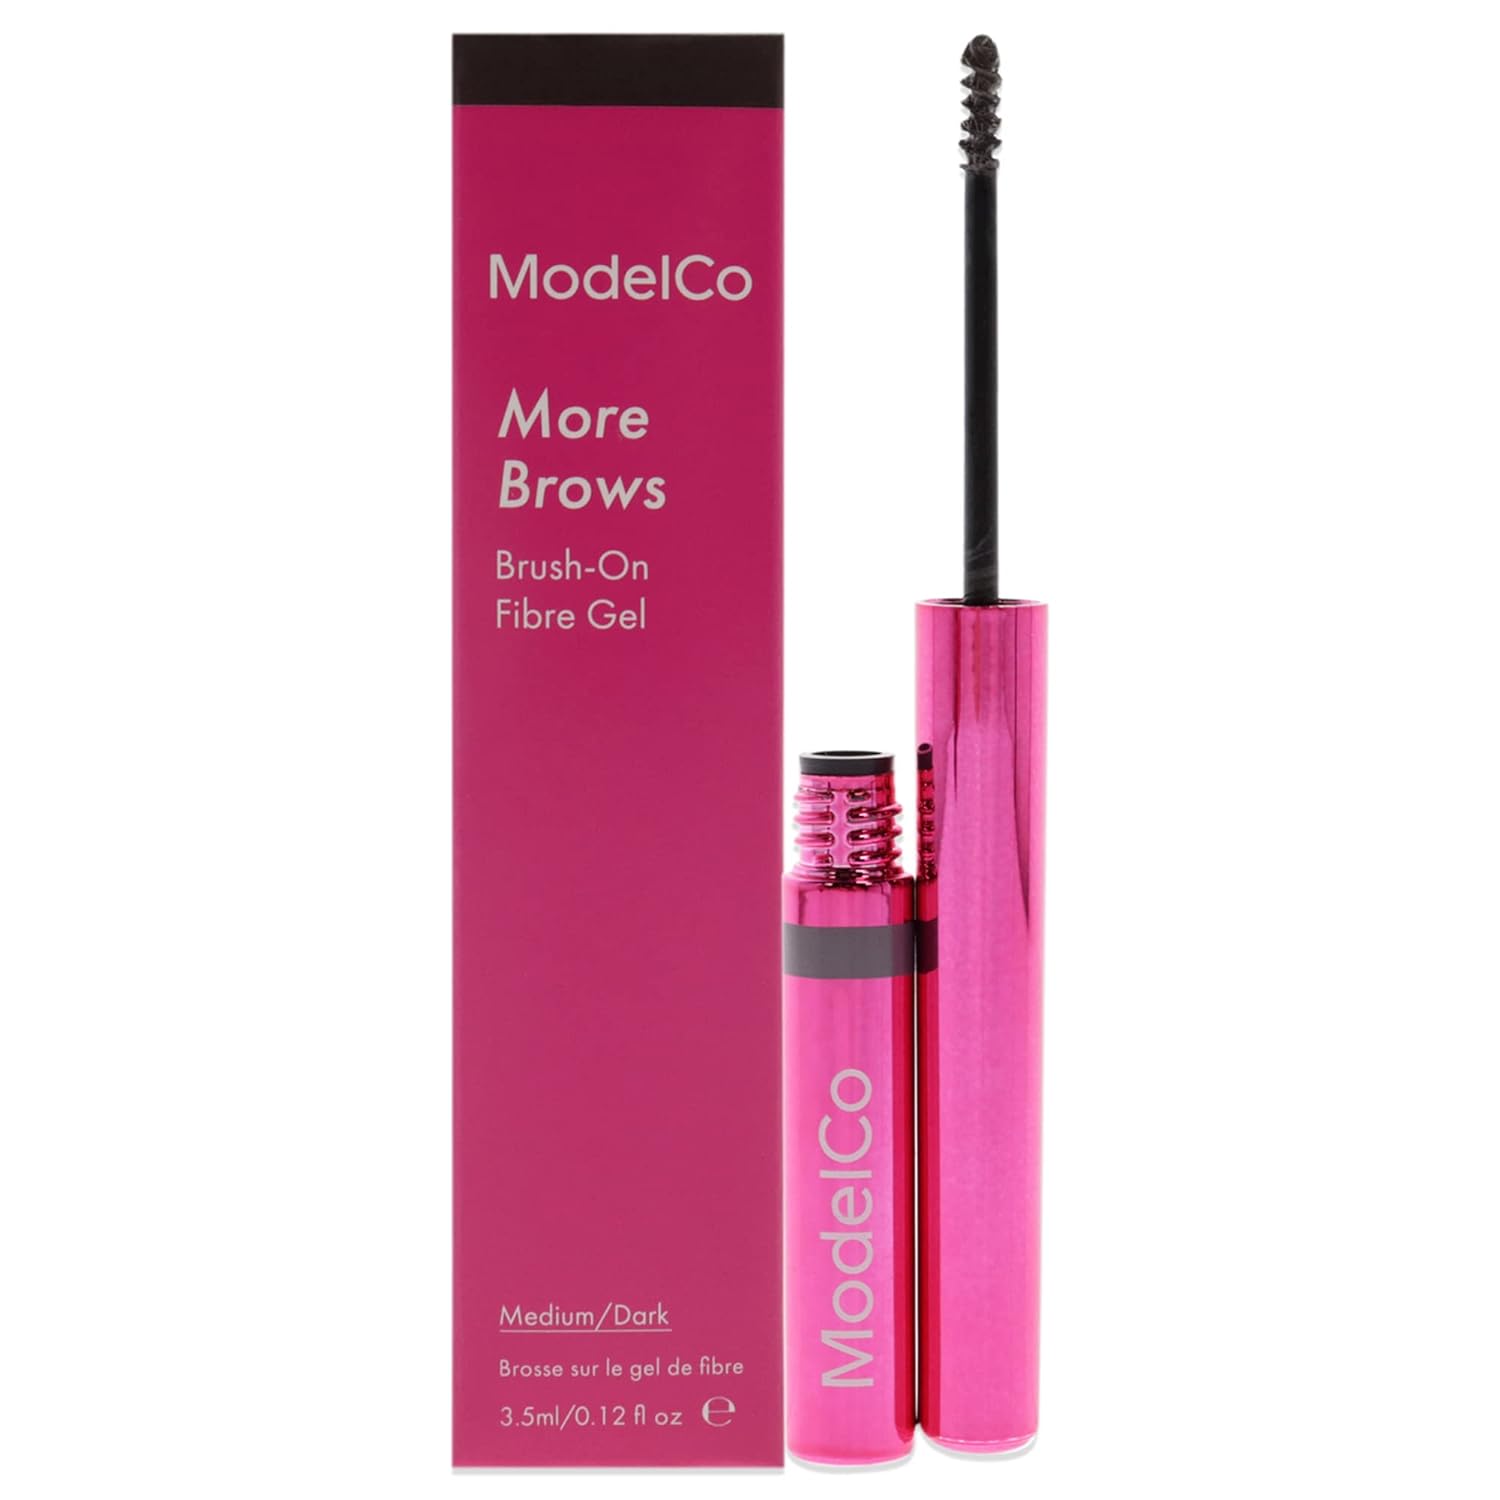 ModelCo More Brows Colored Eyebrow Gel - Perfect For Thin, Sparse Brows - Innovative Brush-On Fiber Gel - Gives The Appearance Of Fuller, Thicker Brows Instantly - Medium Dark - 0.12